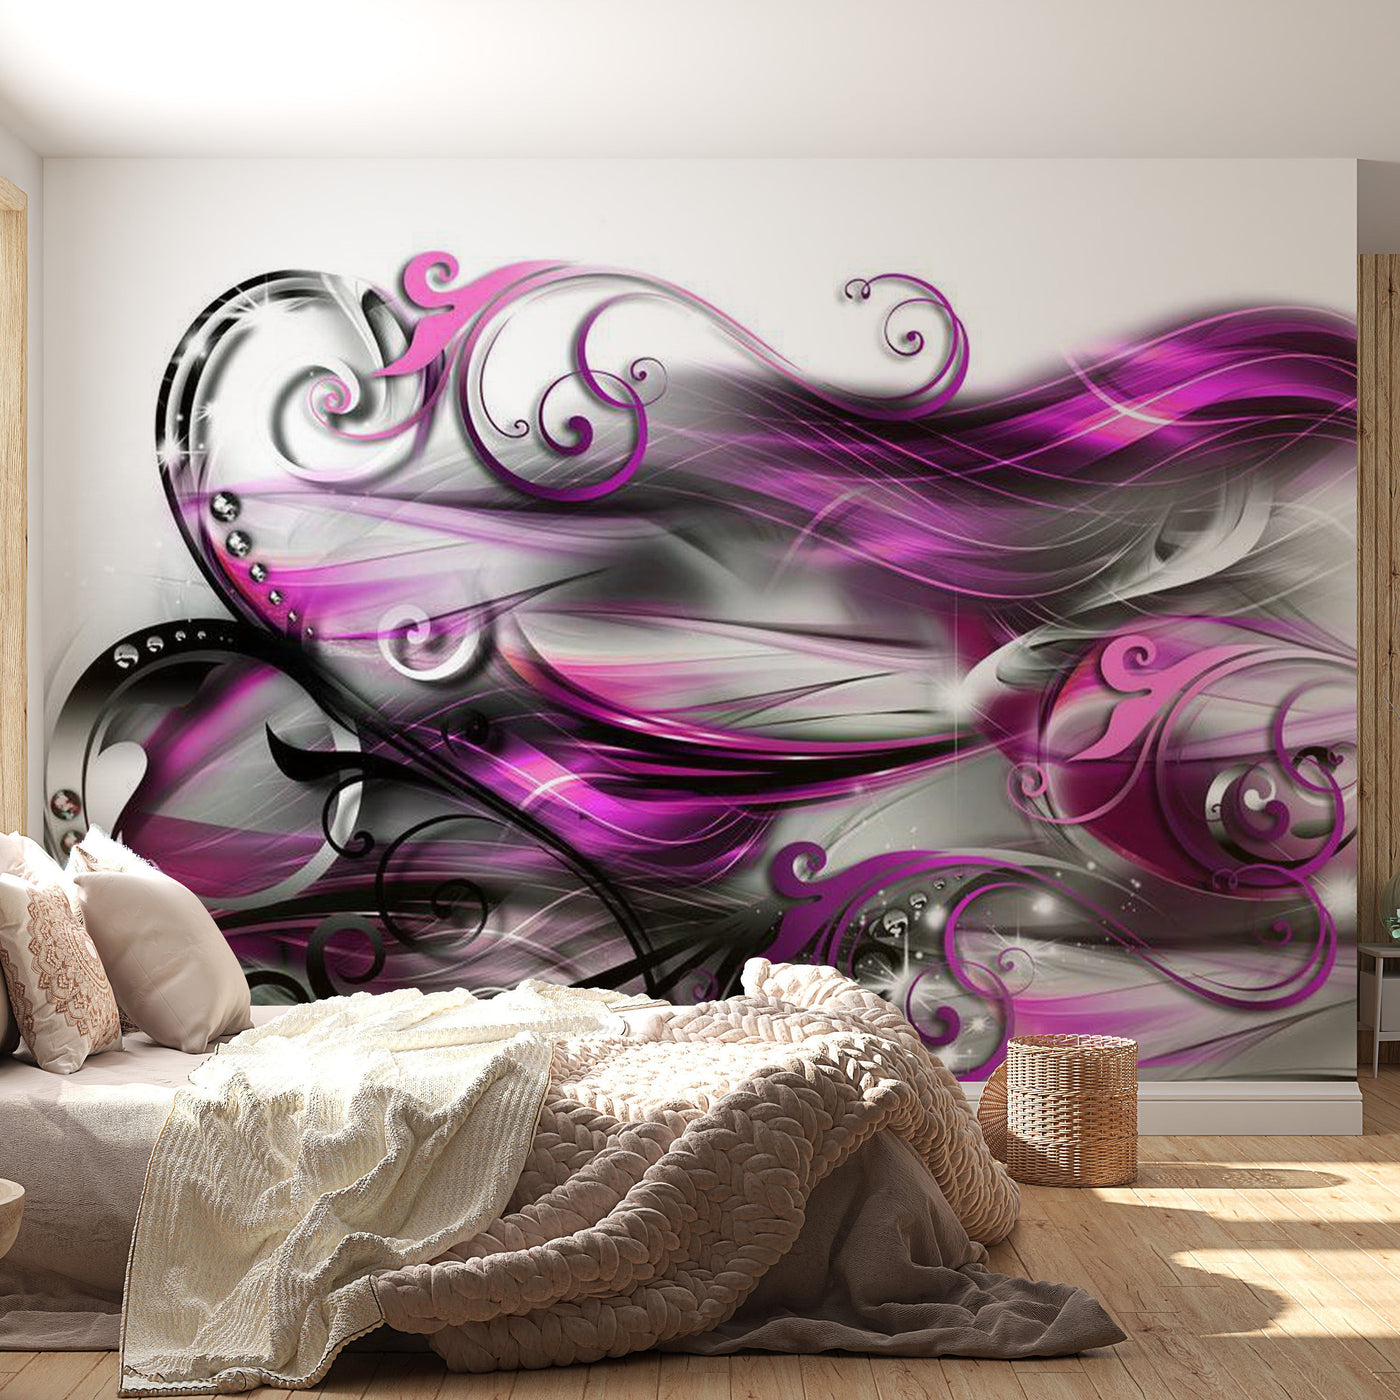 Peel & Stick Glam Wall Mural - Purple Expression - Removable Wall Decals